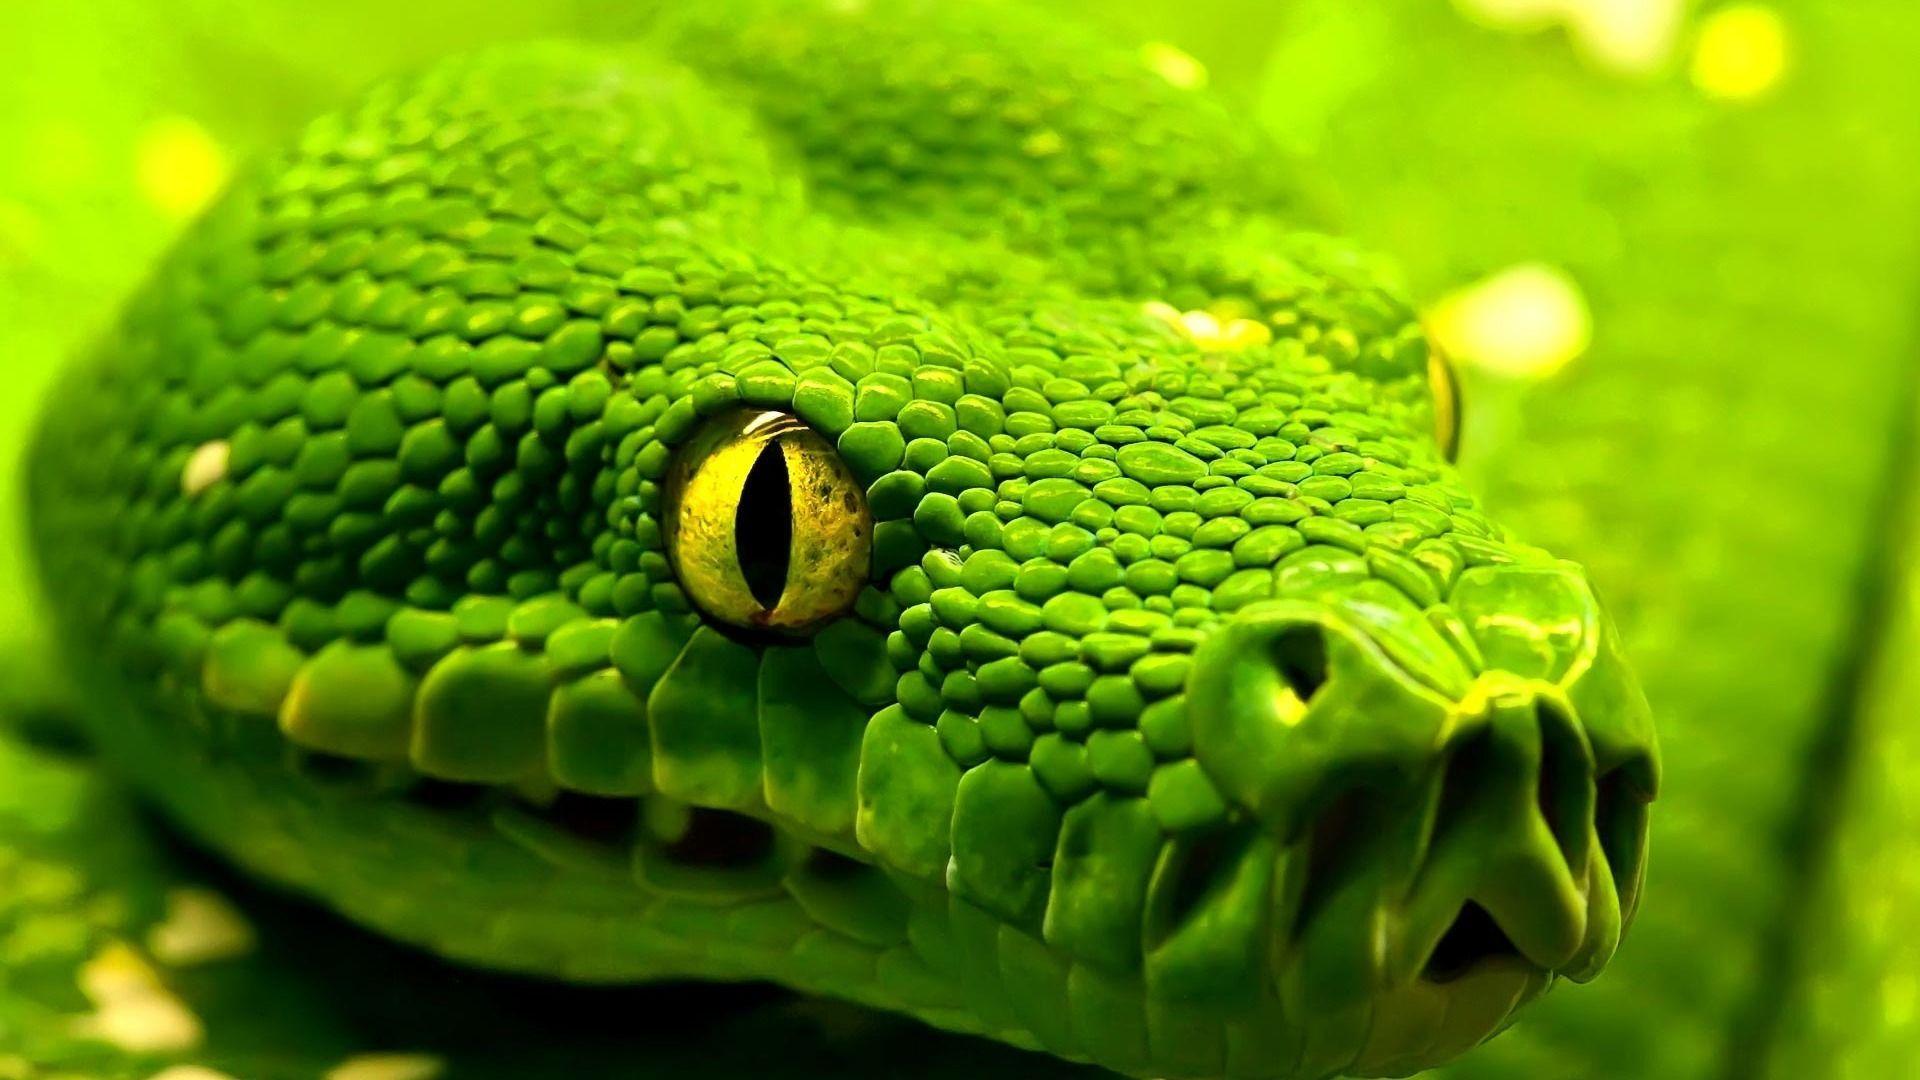 Hình nền 1920x1080 Snakes Wallpaper 1920 × 1080 Picture Of Snake